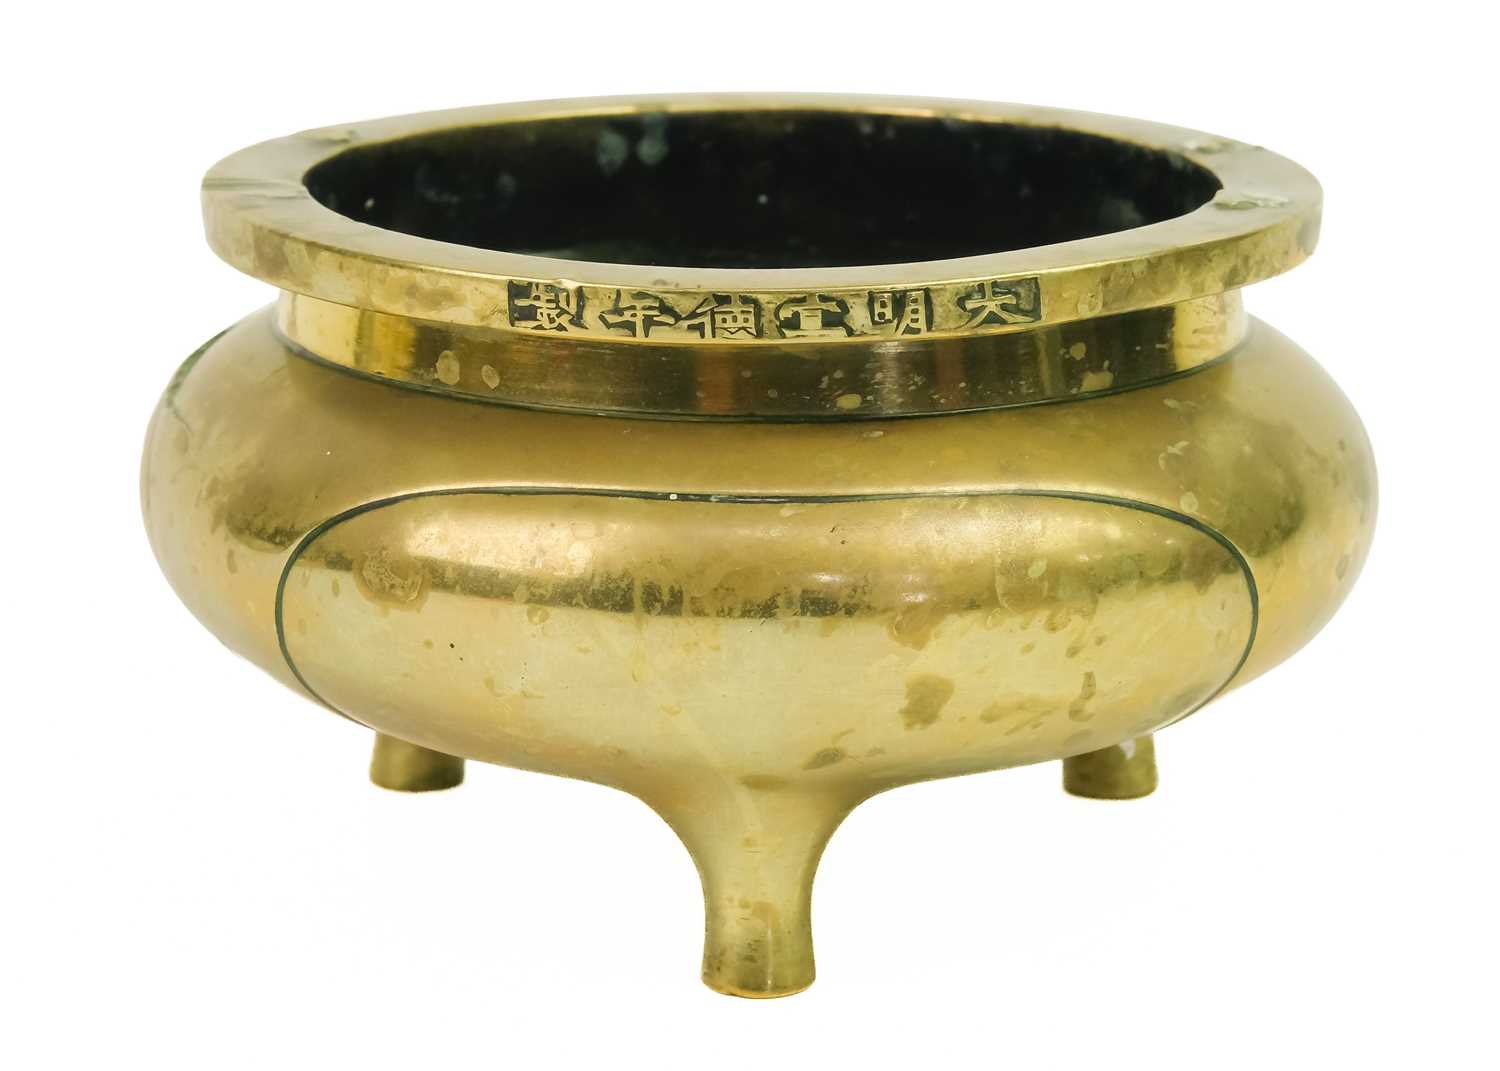 A Chinese bronze censer, Qing Dynasty, 19th century.